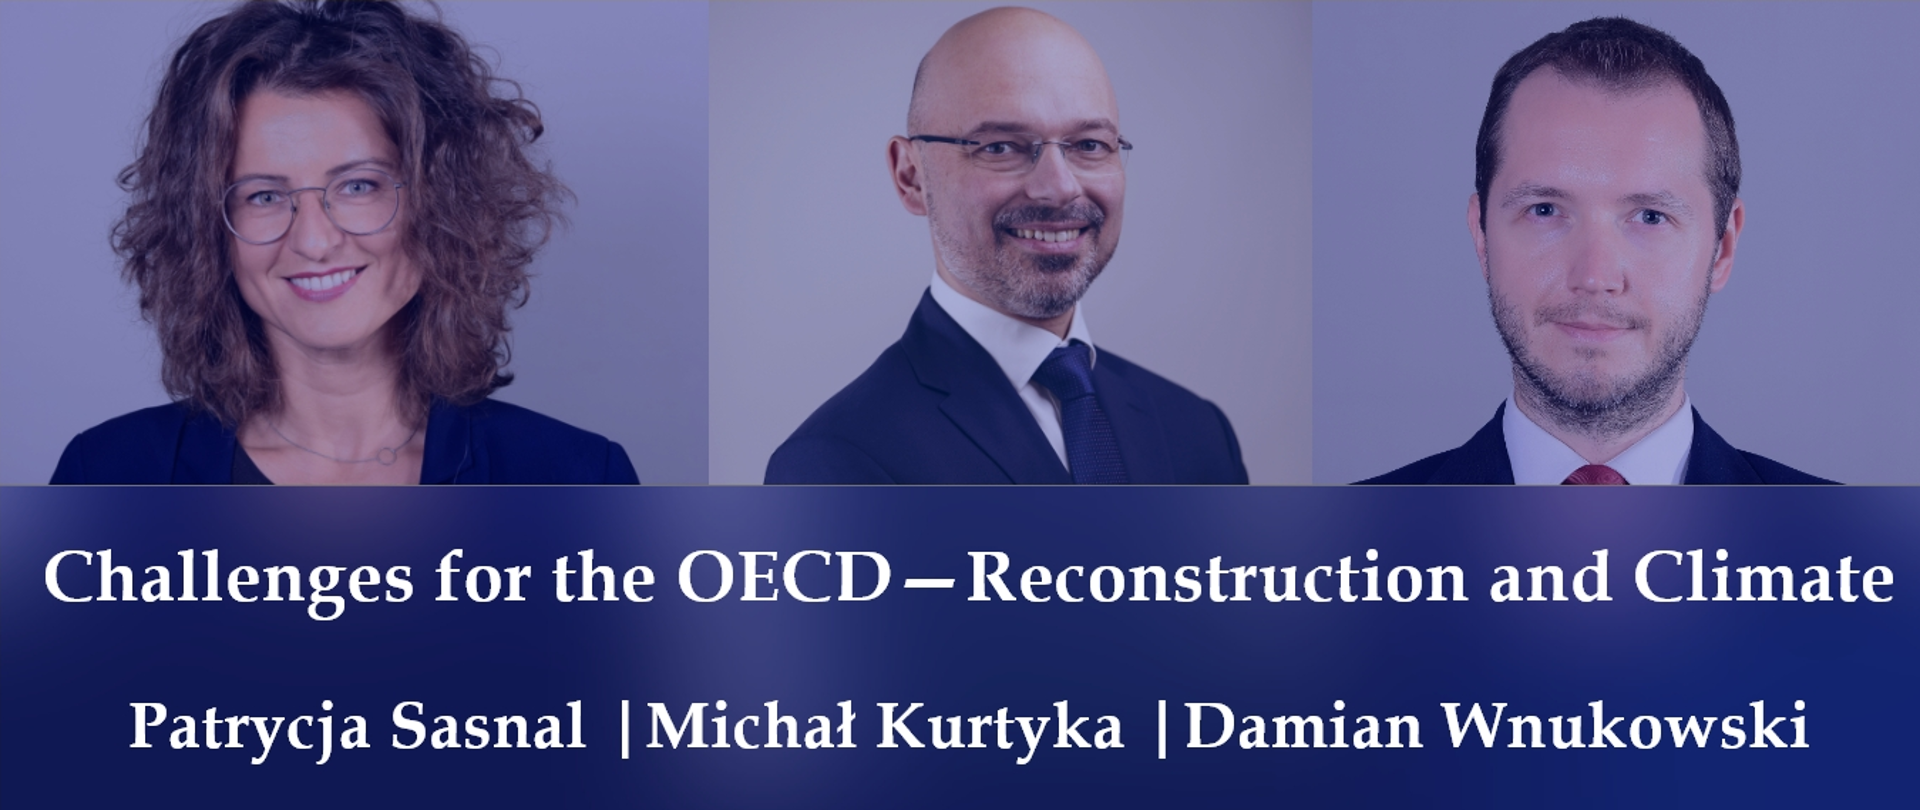 Michał Kurtyka, PhD, Minister of Climate and Environment, to present his ideas for the OECD 